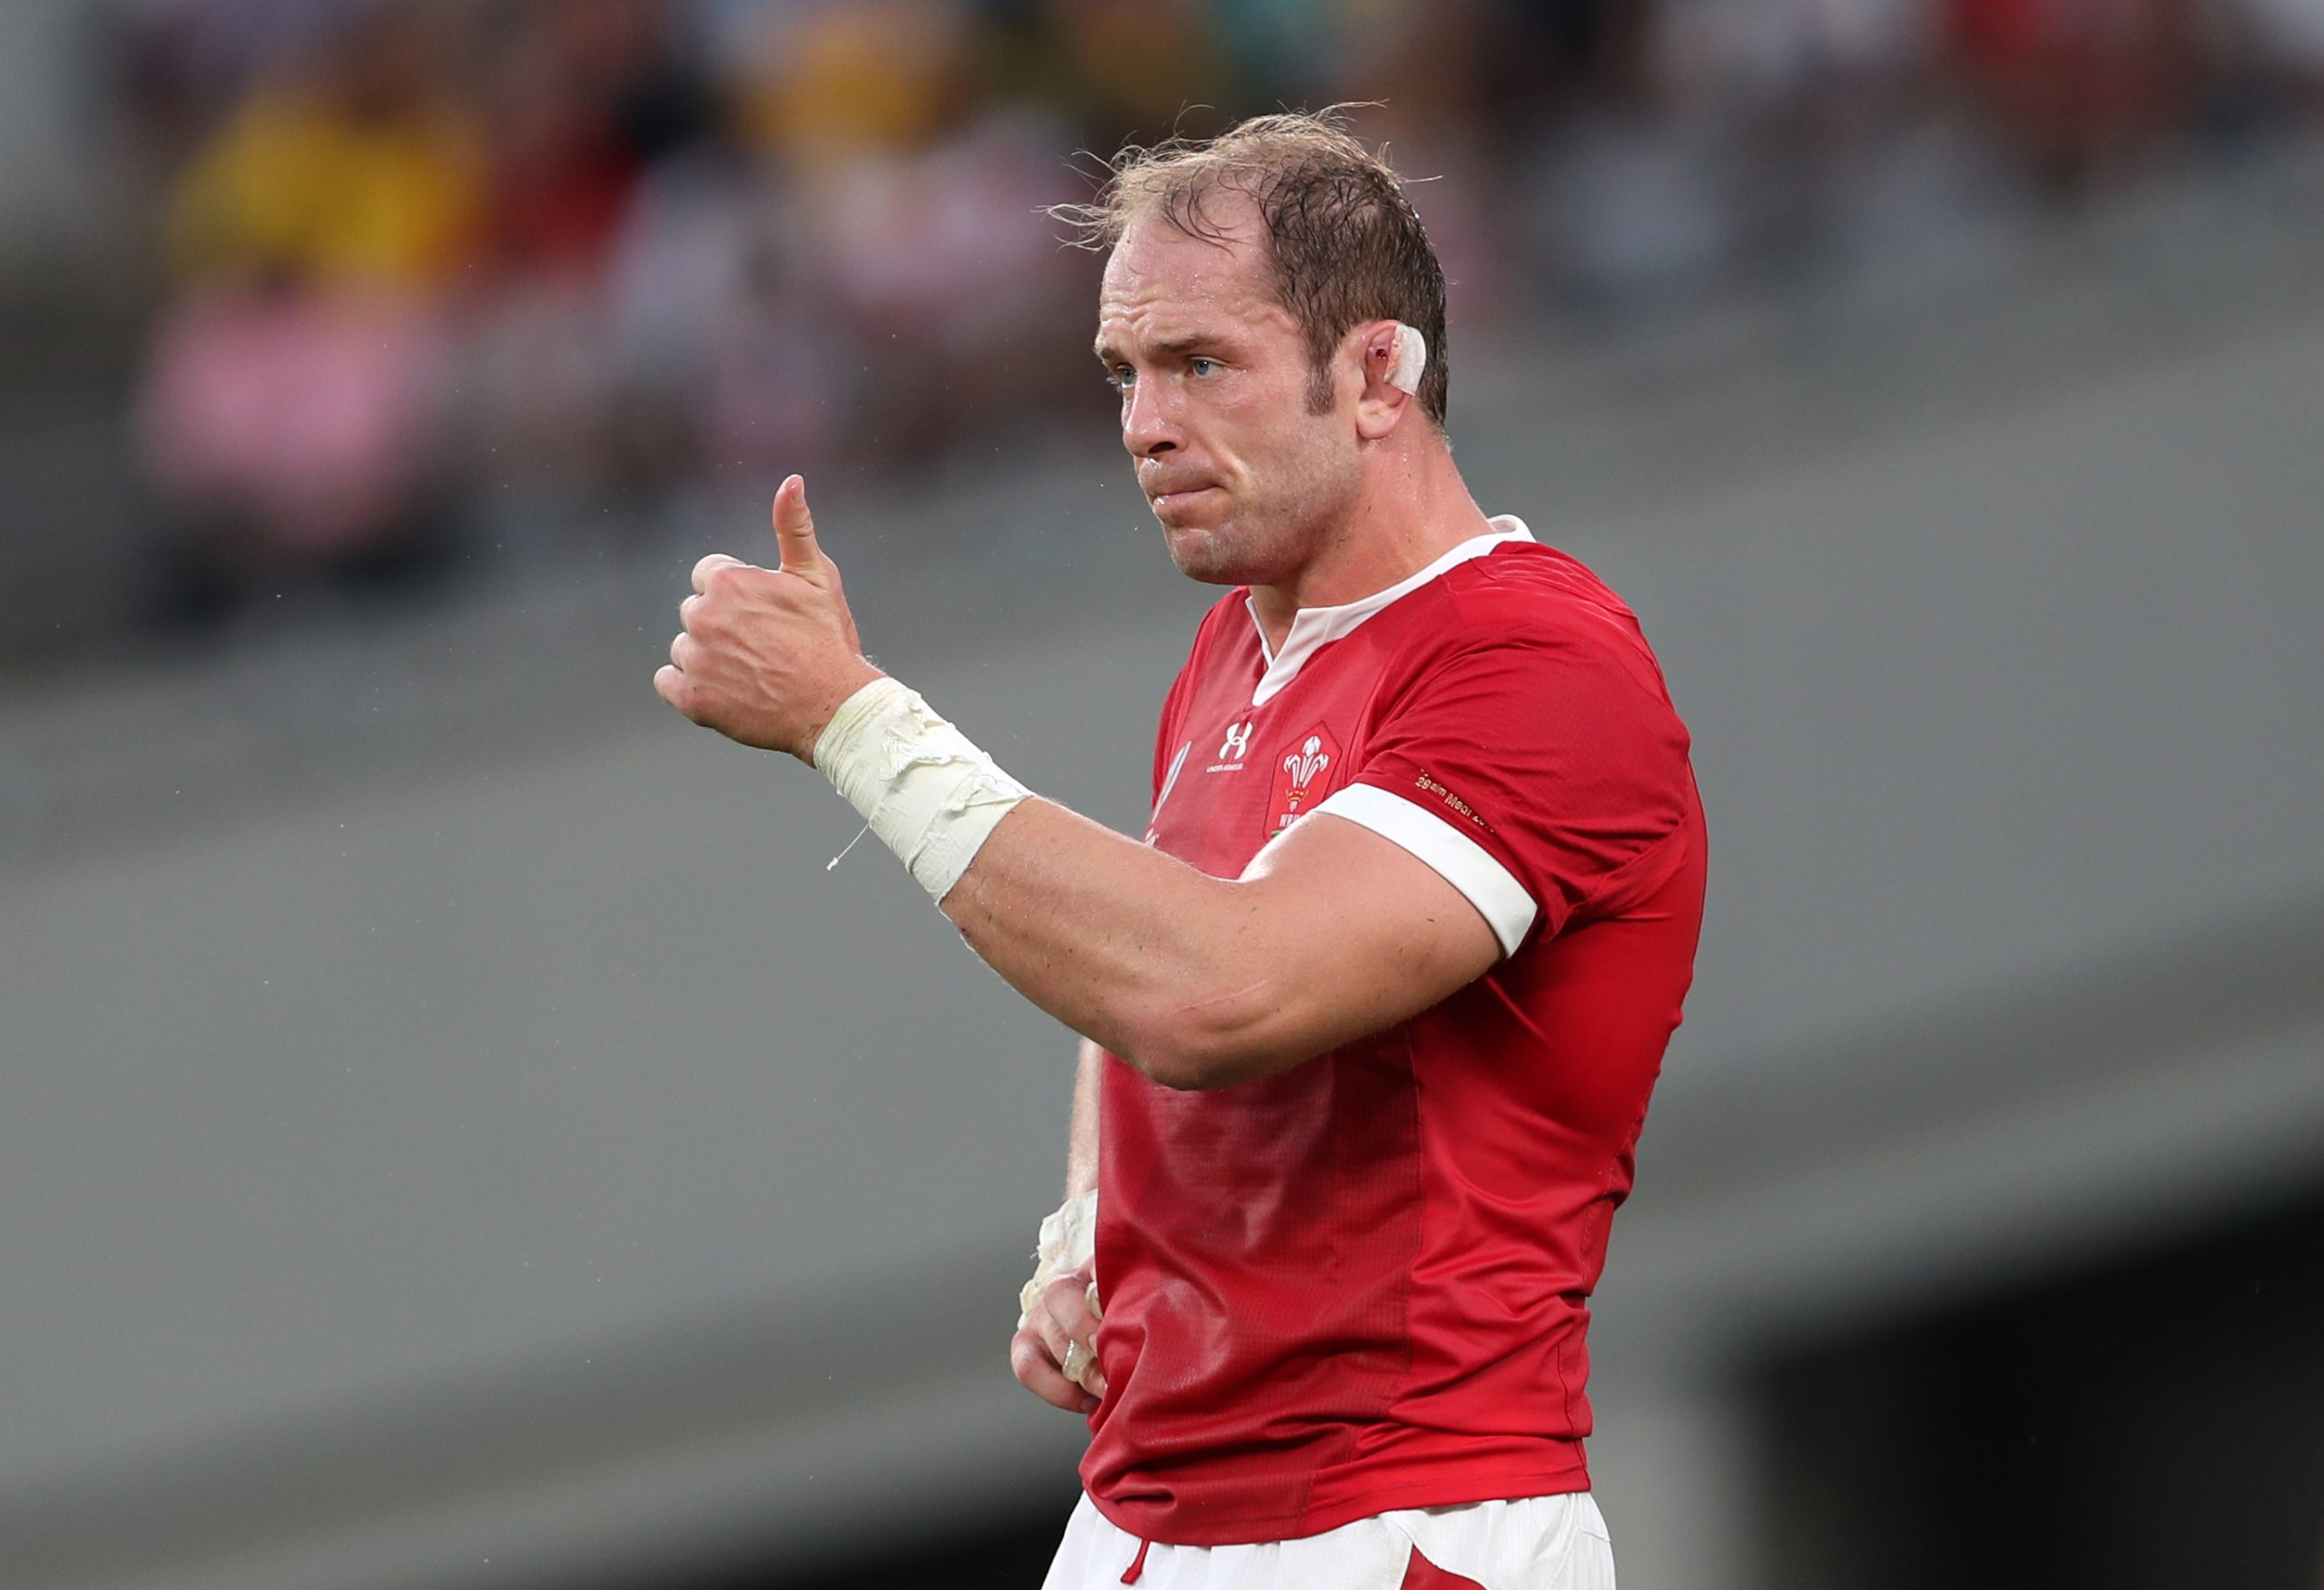 Record-breaking Alun Wyn Jones will go down as a rugby union all-time great